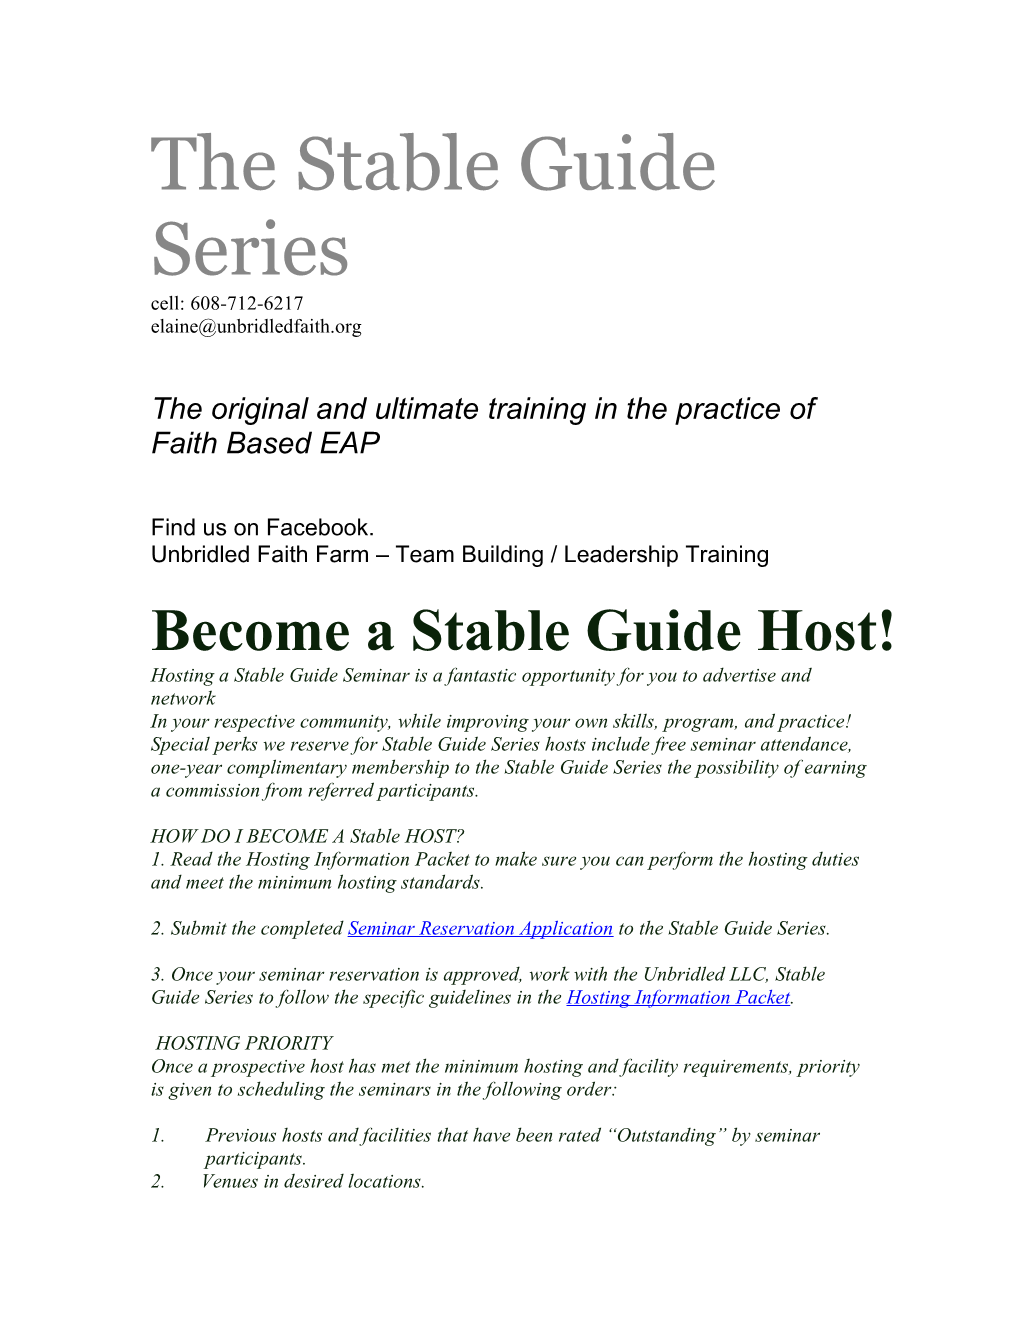 The Stable Guide Series